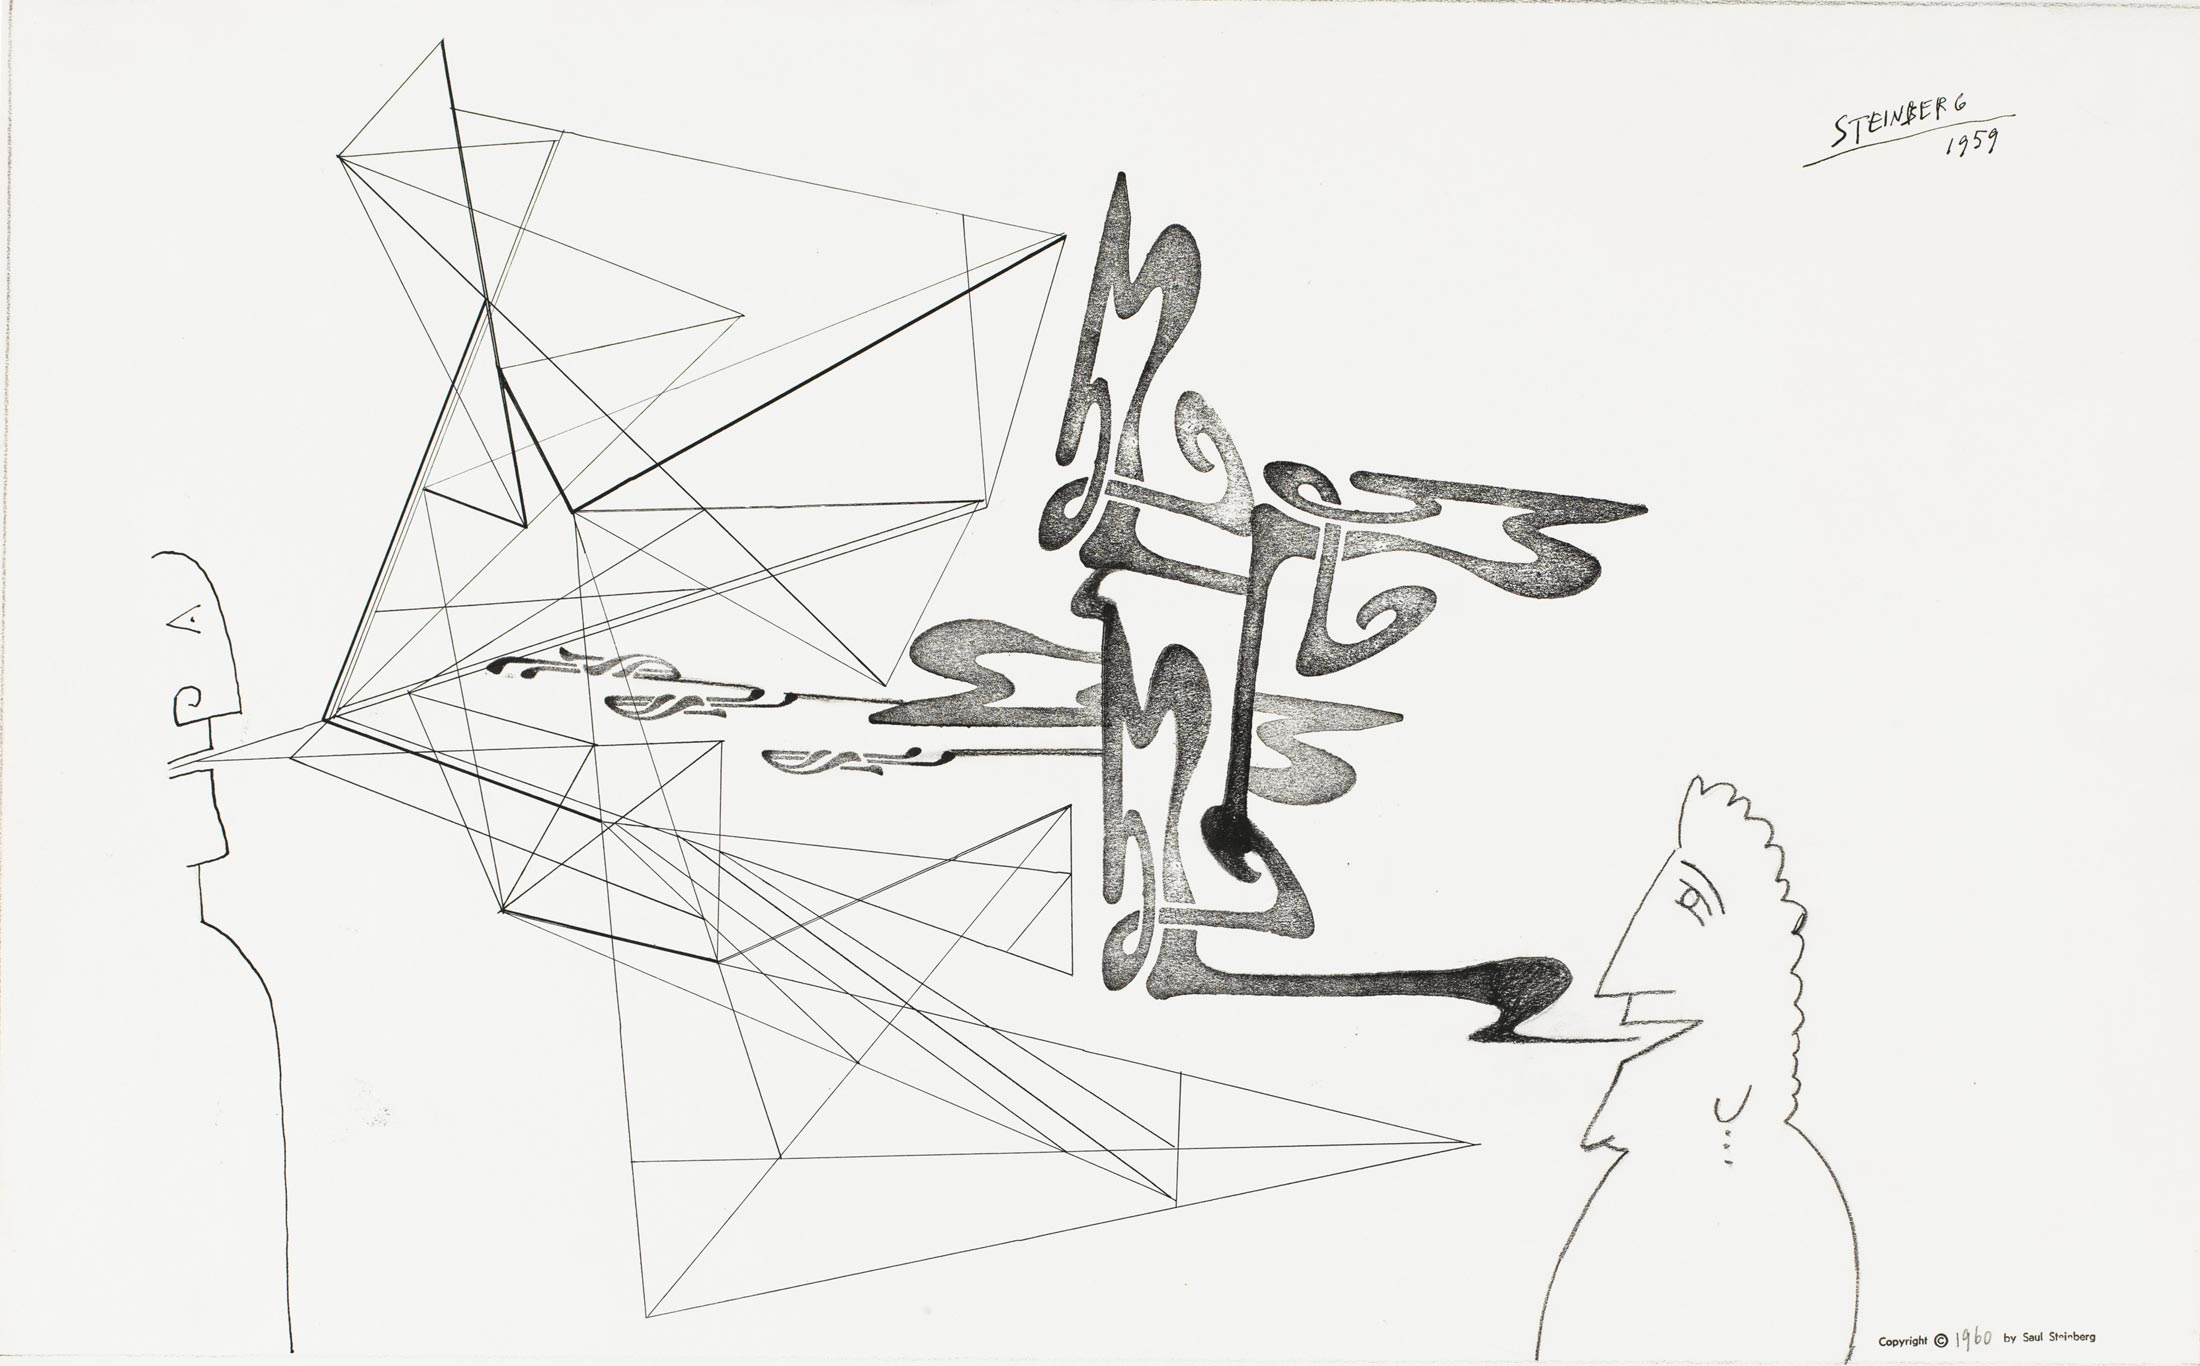 <em>Speech</em>, 1959. Ink, pencil, conté crayon, and rubber stamps on paper, 15 x 20 in. Minneapolis Institute of Art; Gift of The Saul Steinberg Foundation.